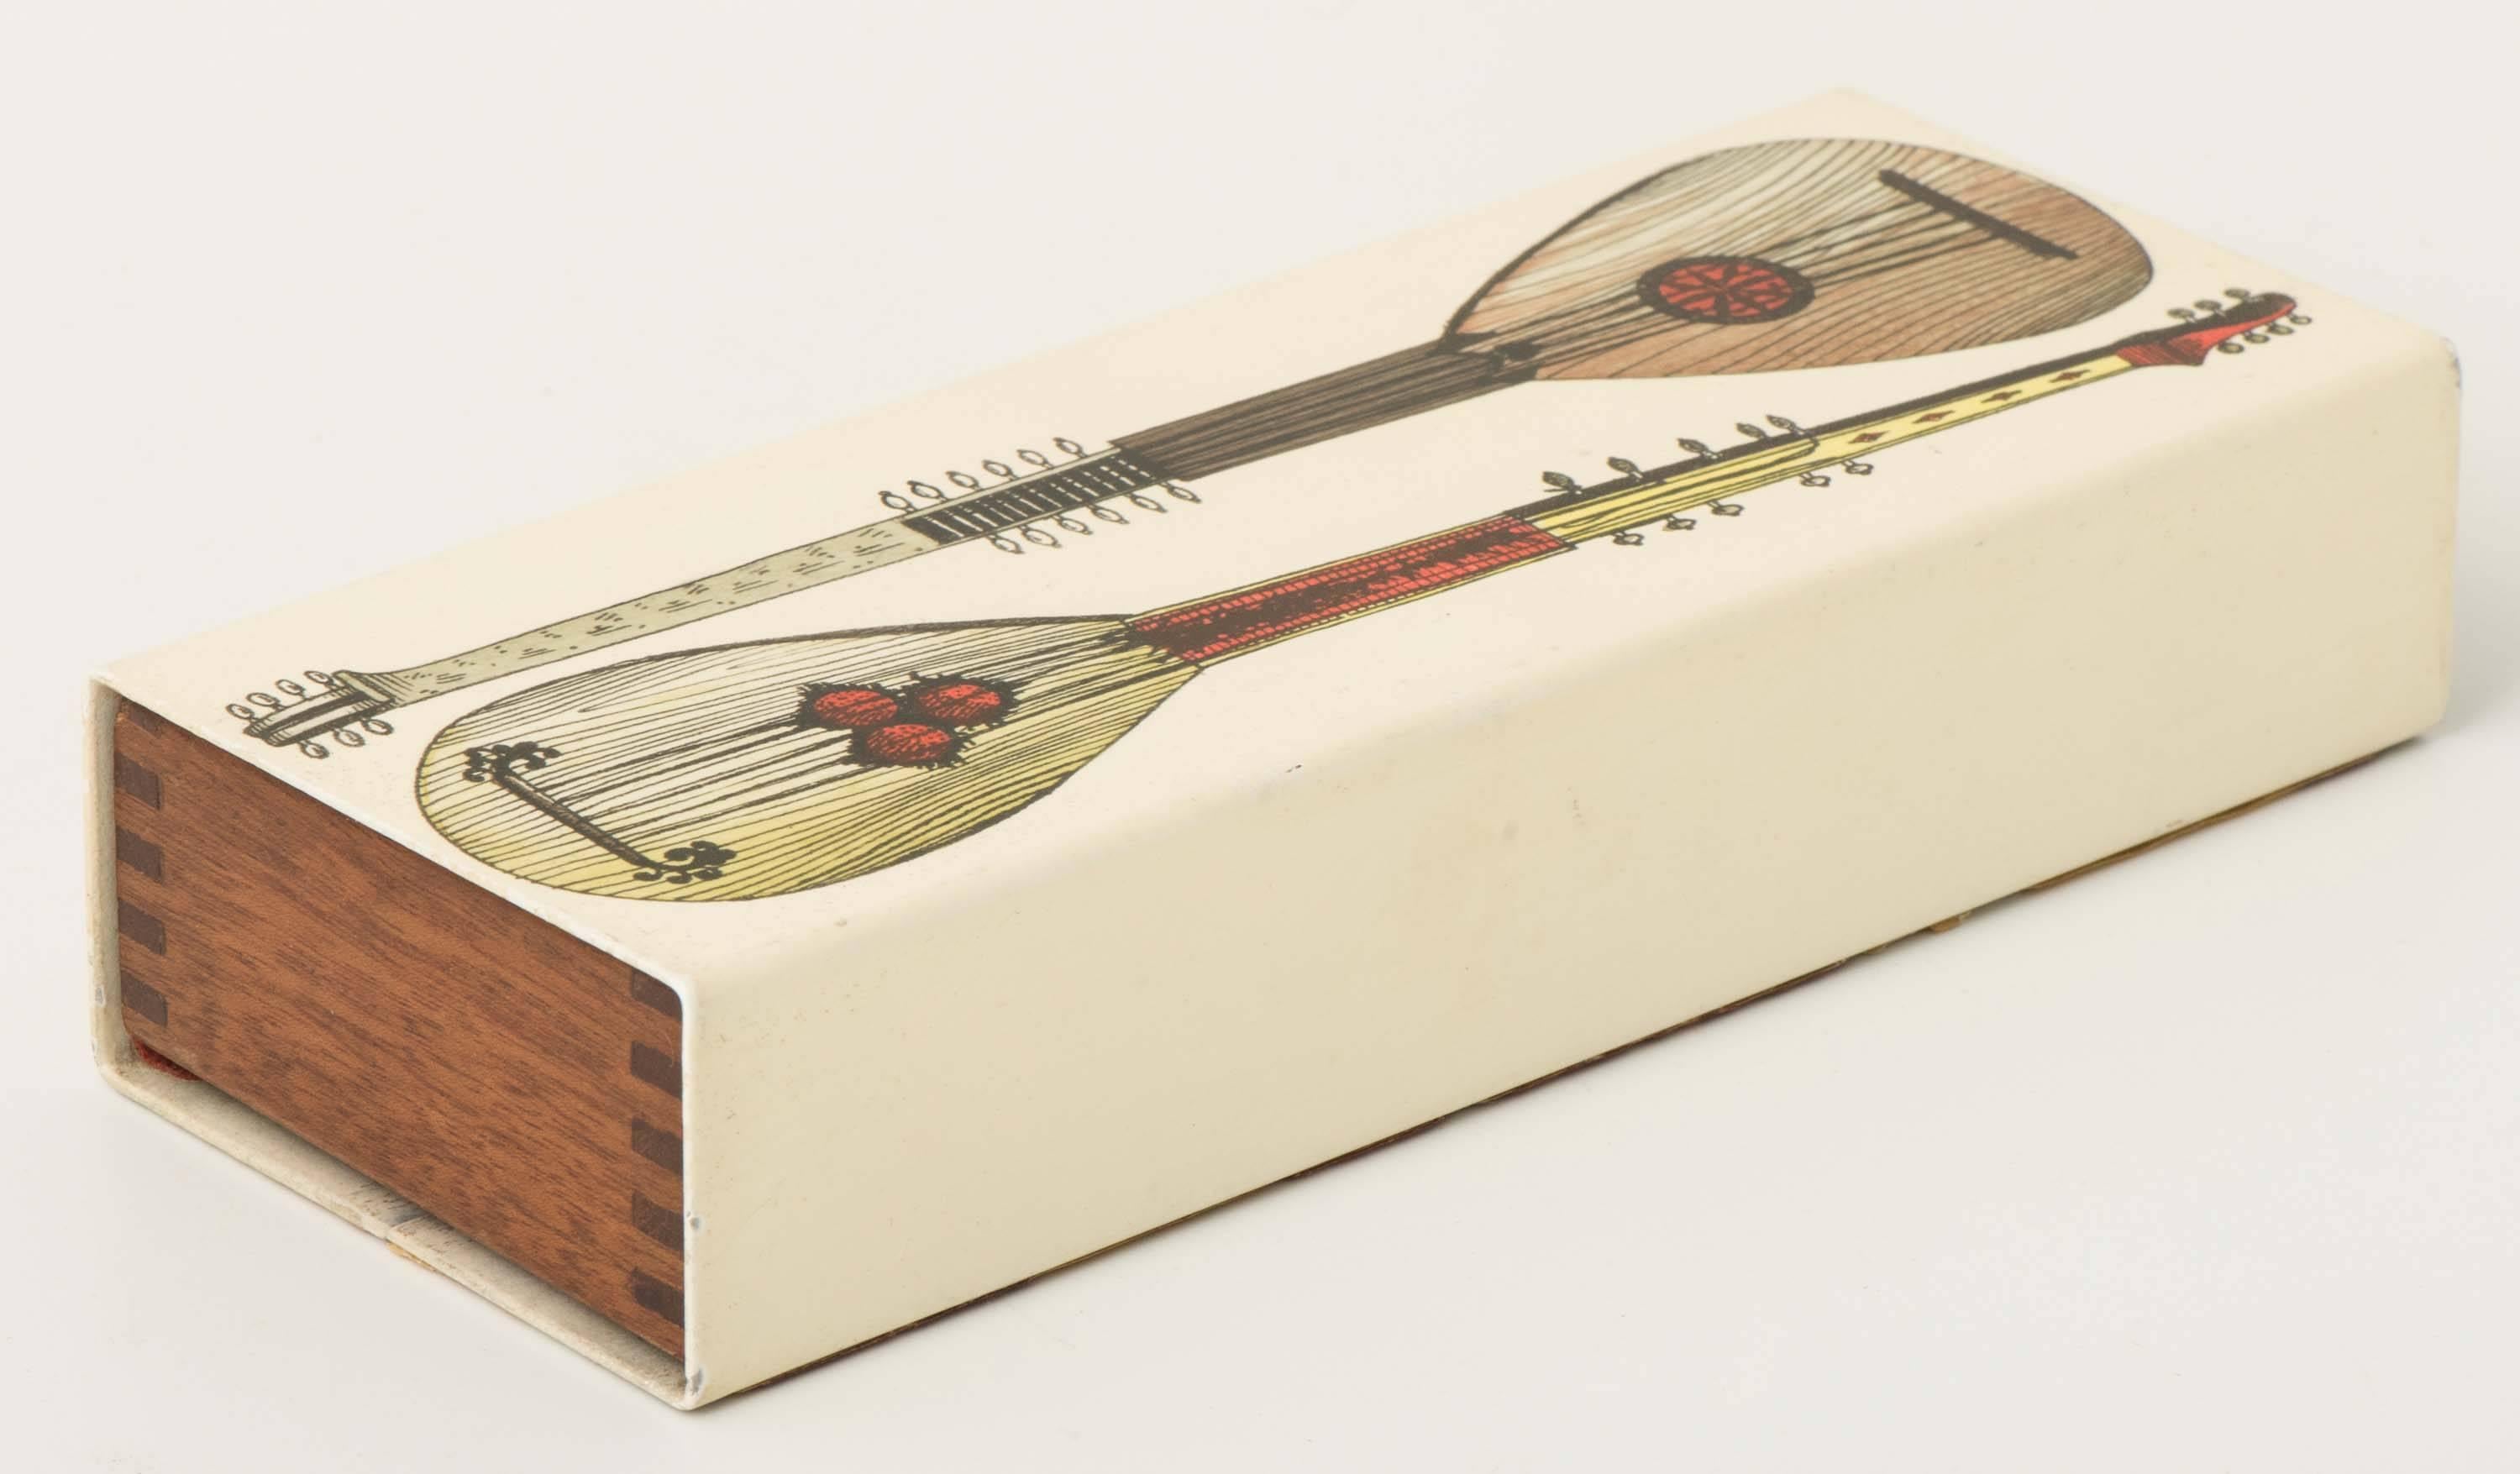 A Piero Fornasetti box,
“Strumenti Musicali.”
Metal lithographically printed and hand-colored. Mahogany,
Italy, circa 1950.
Measures: 4 cm x 20.2 cm x 8 cm.
 